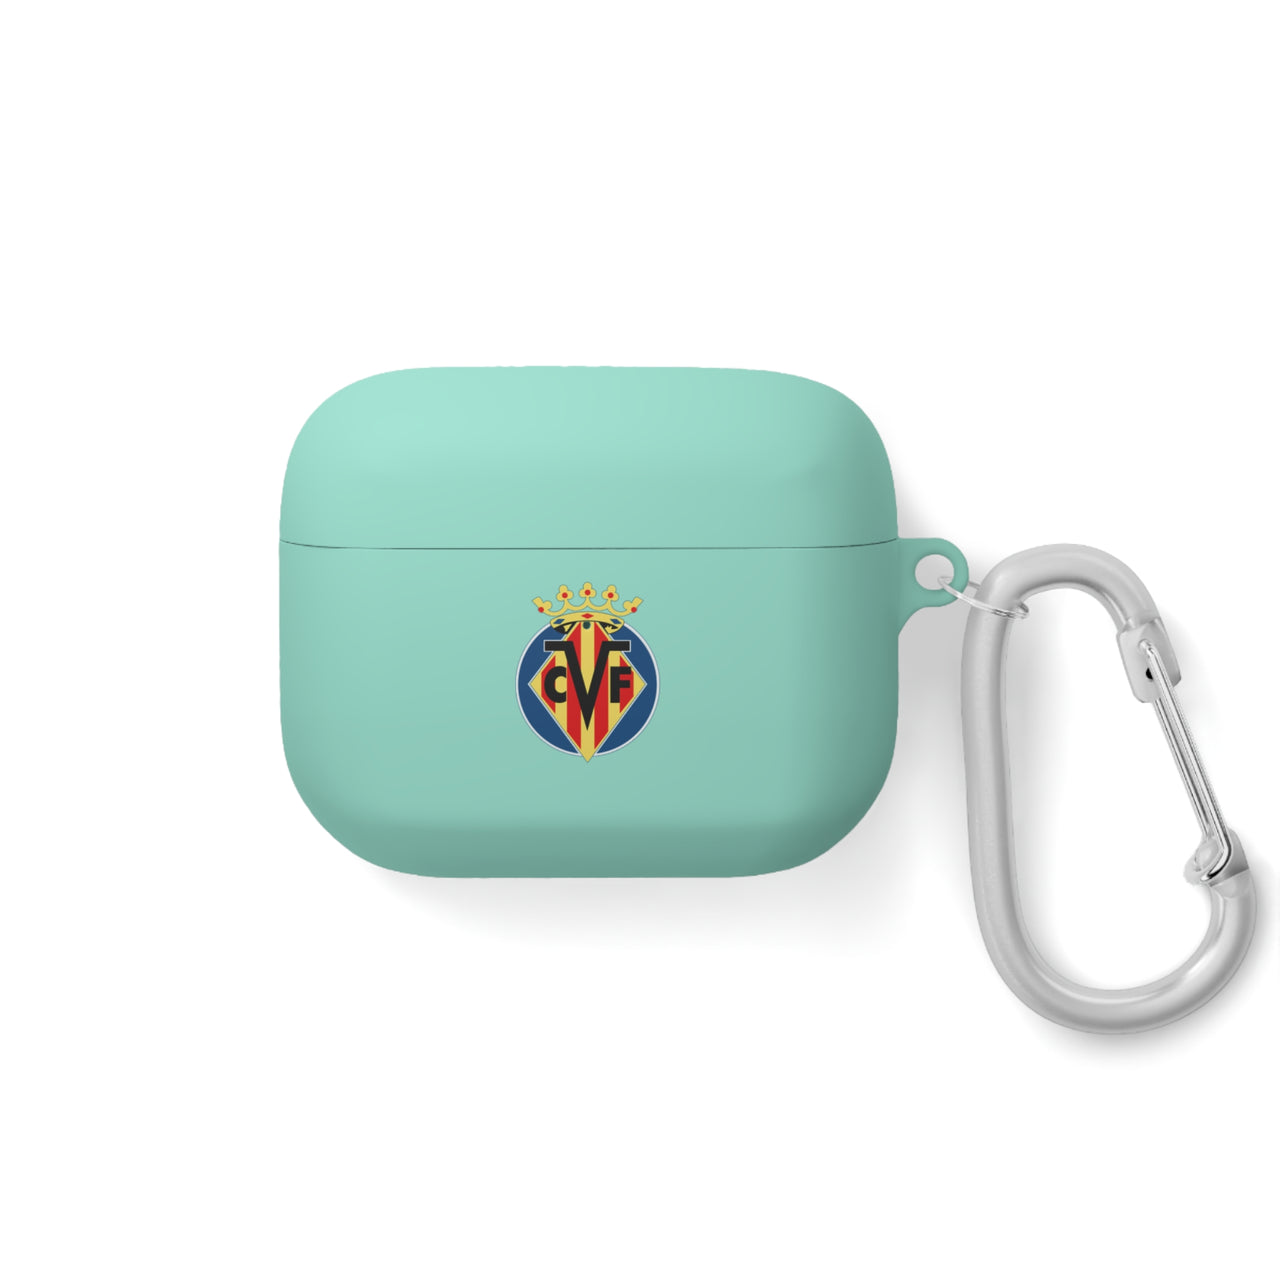 Villarreal AirPods and AirPods Pro Case Cover